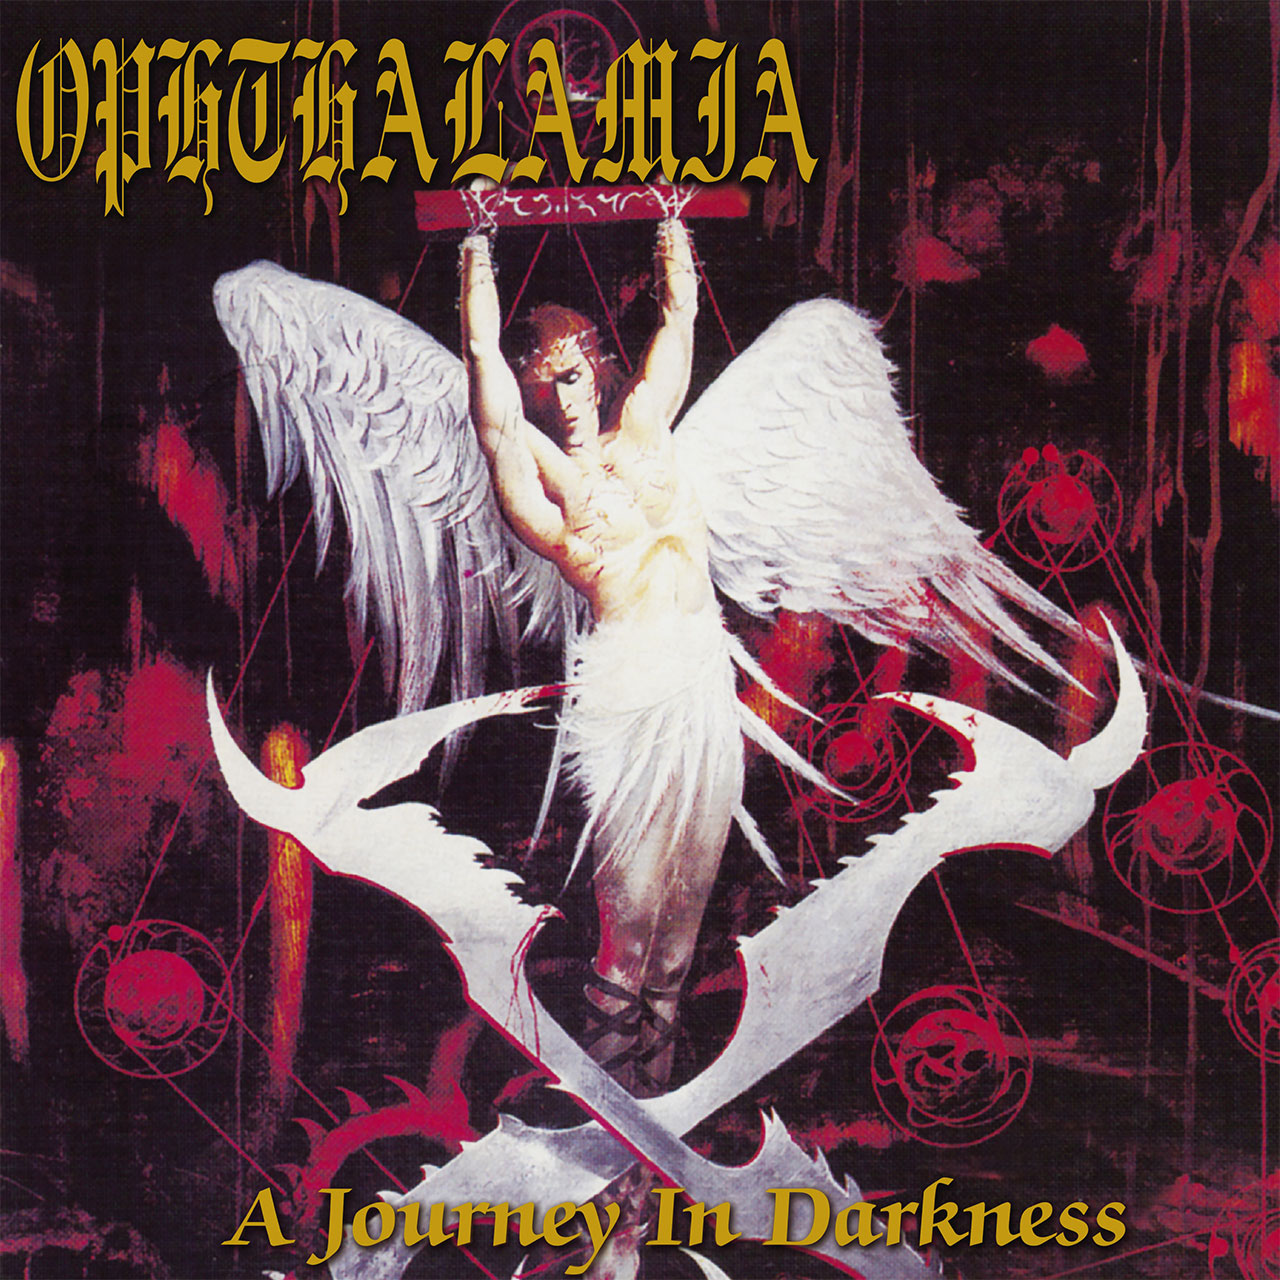 Ophthalamia - A Journey in Darkness (2009 Reissue) (CD)